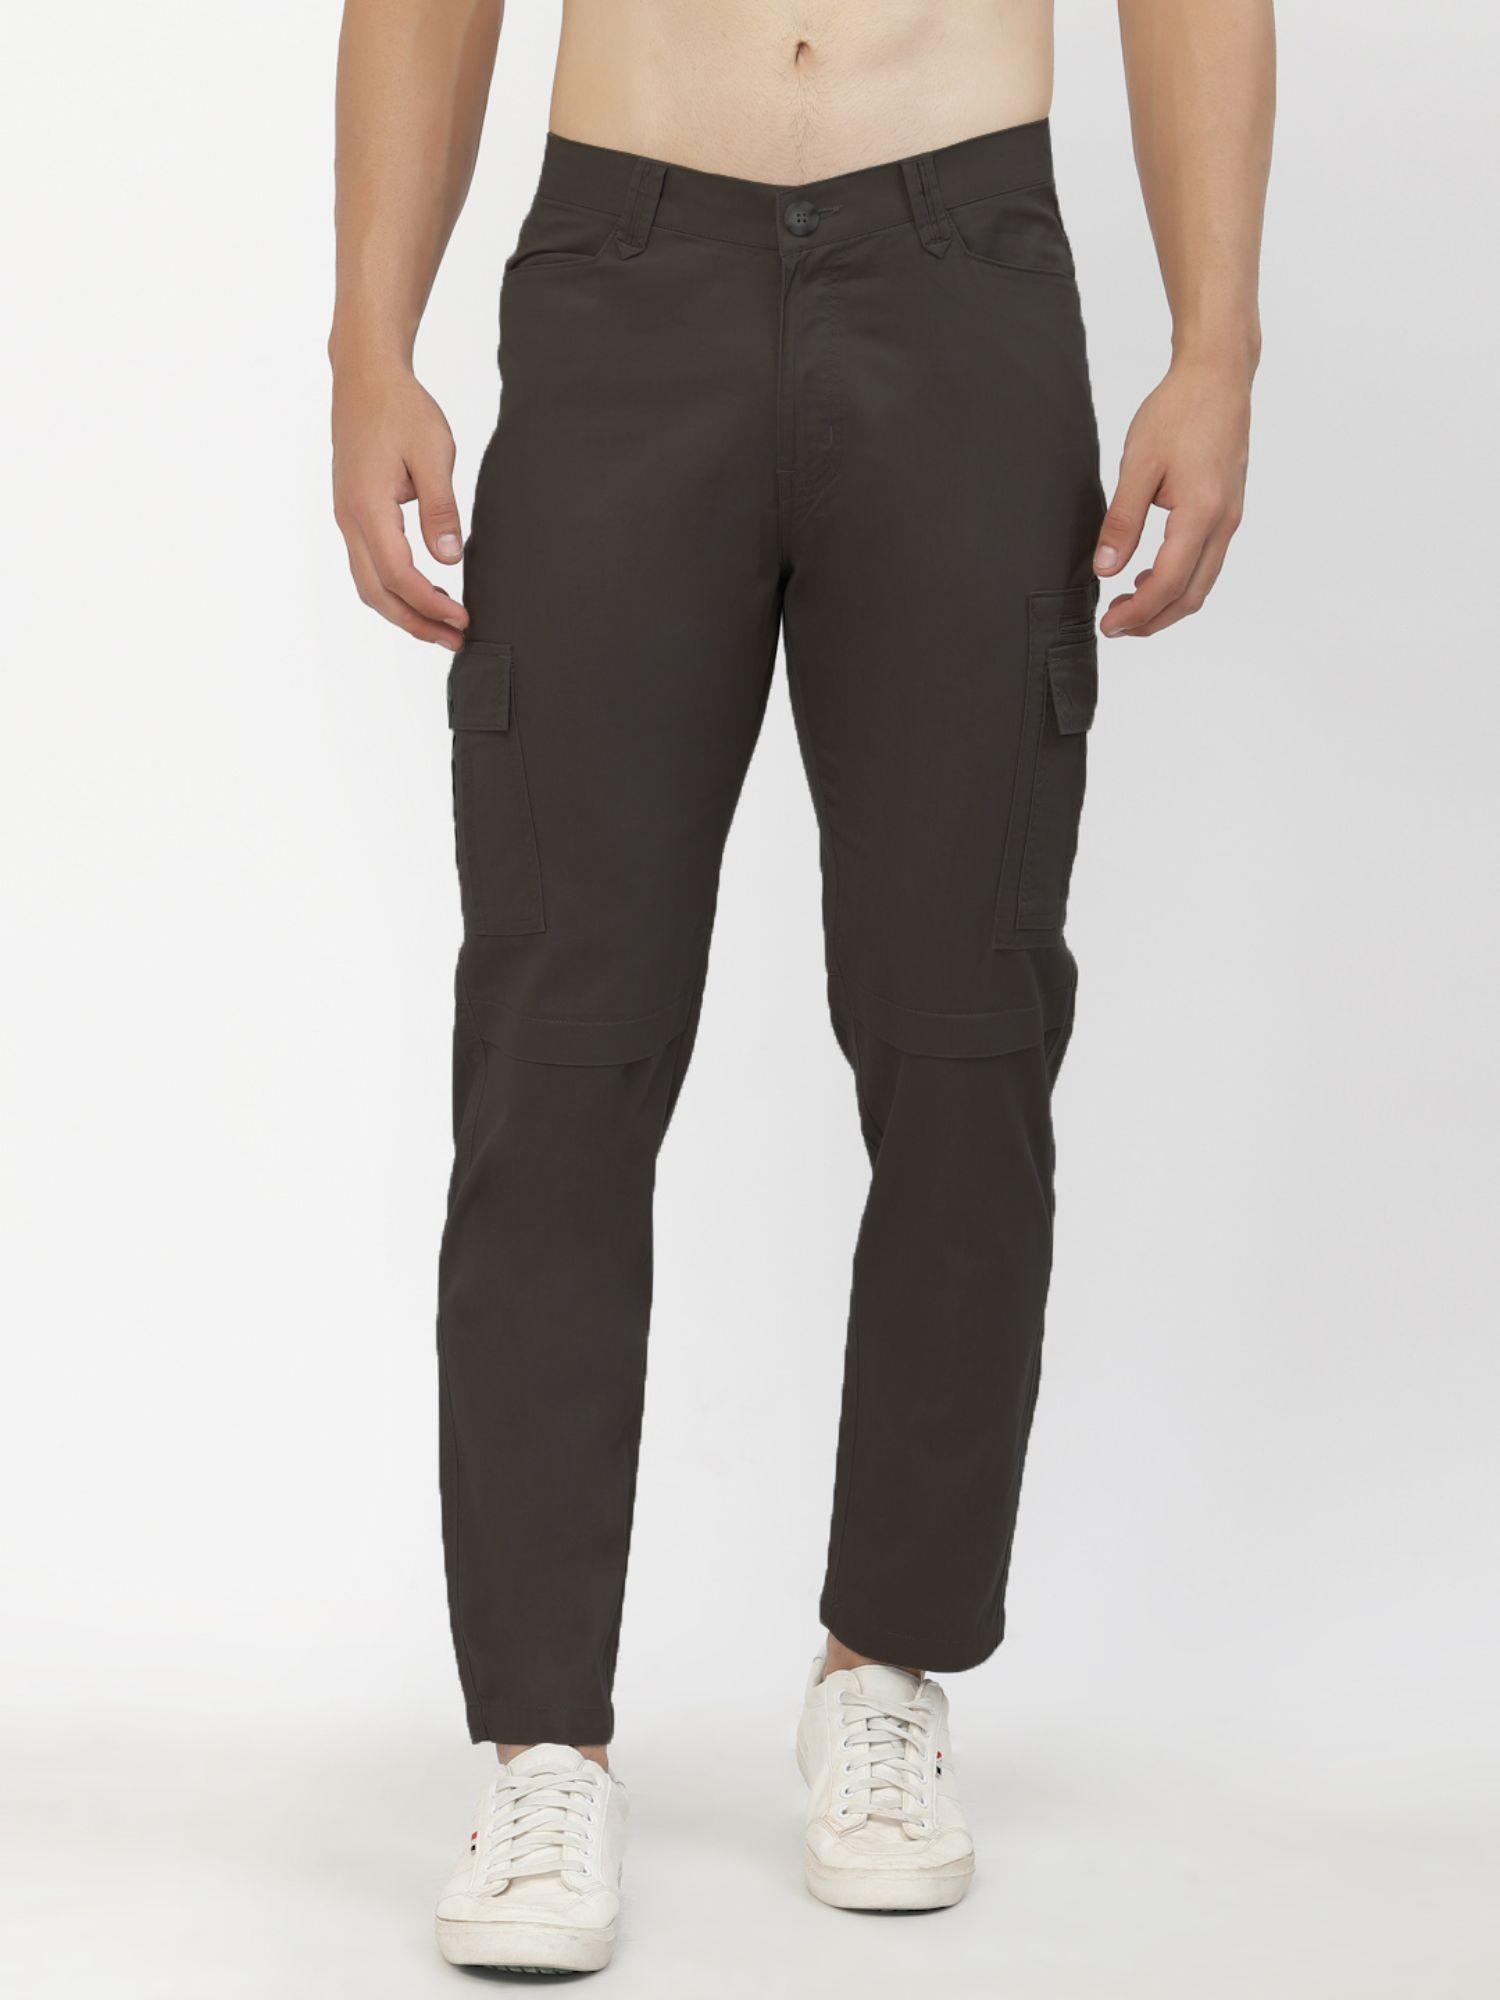 six-pockets-cargo-pants-for-men---brown